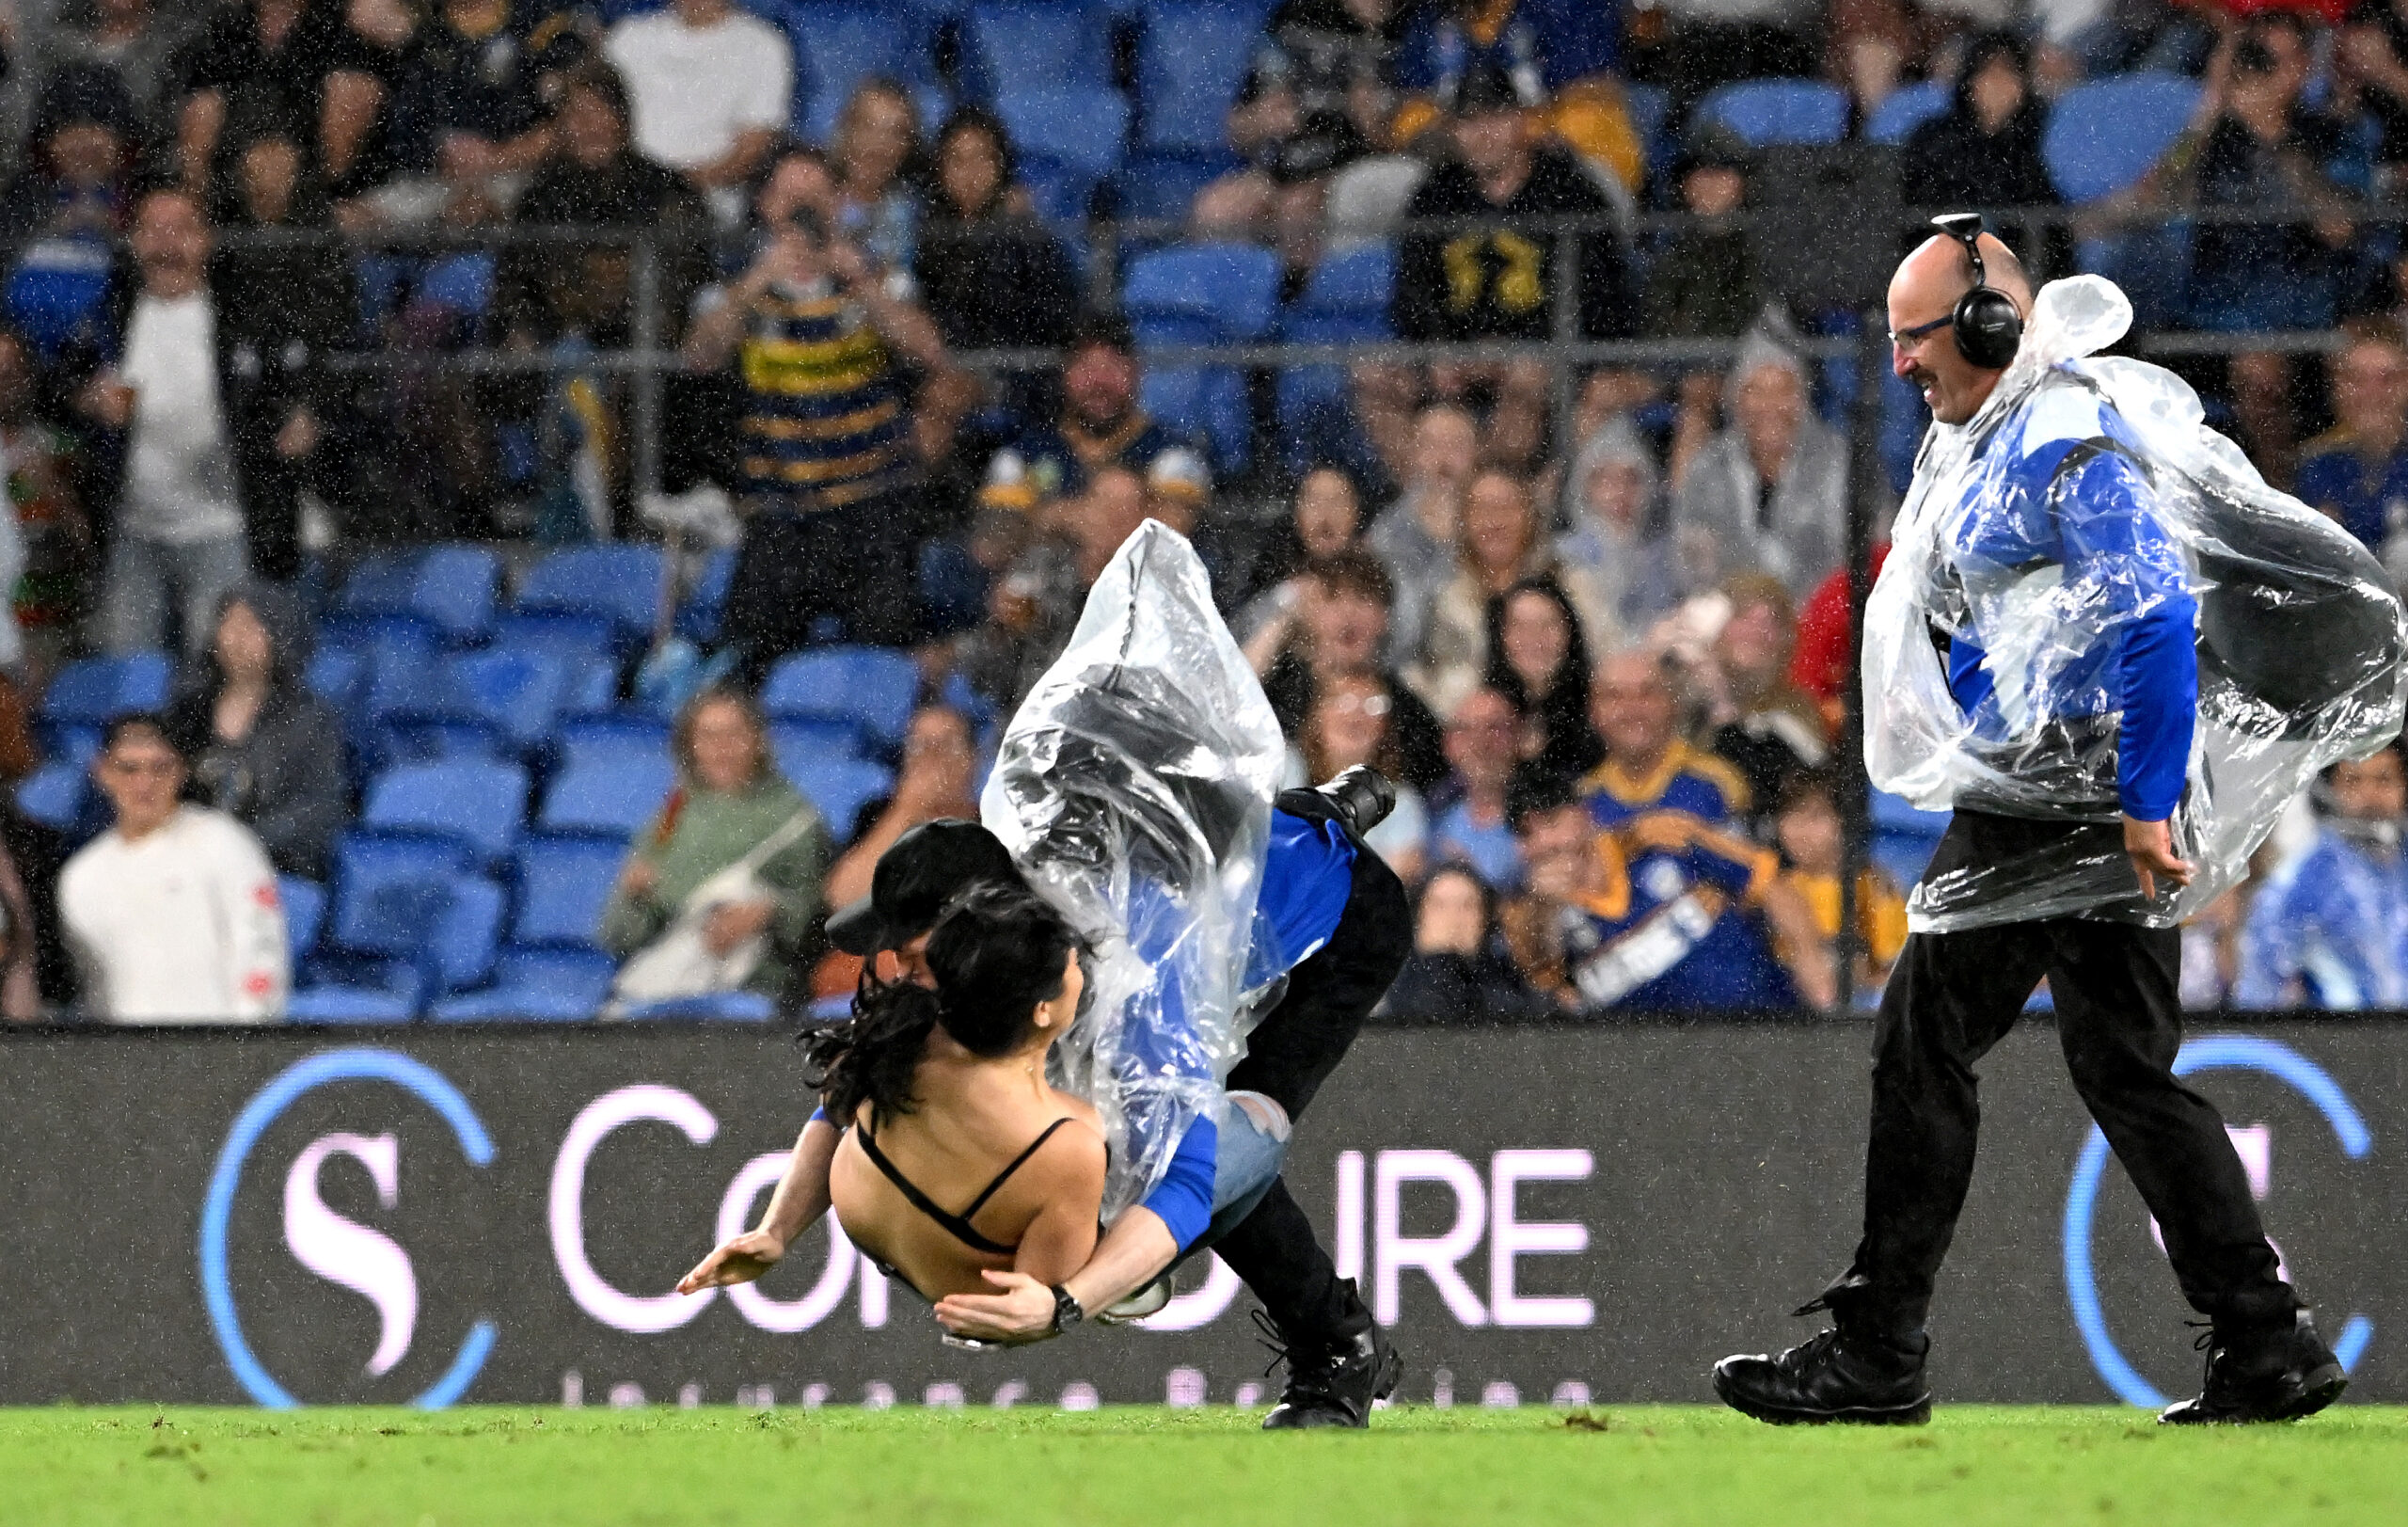 GOLD COAST, AUSTRALIA - APRIL 09: A pitch invader is tackled by a security guard during the round five NRL match between the Gold Coast Titans and the Parramatta Eels at Cbus Super Stadium, on April 09 2022, in Gold Coast, Australia. (Photo by Bradley Kanaris/Getty Images)